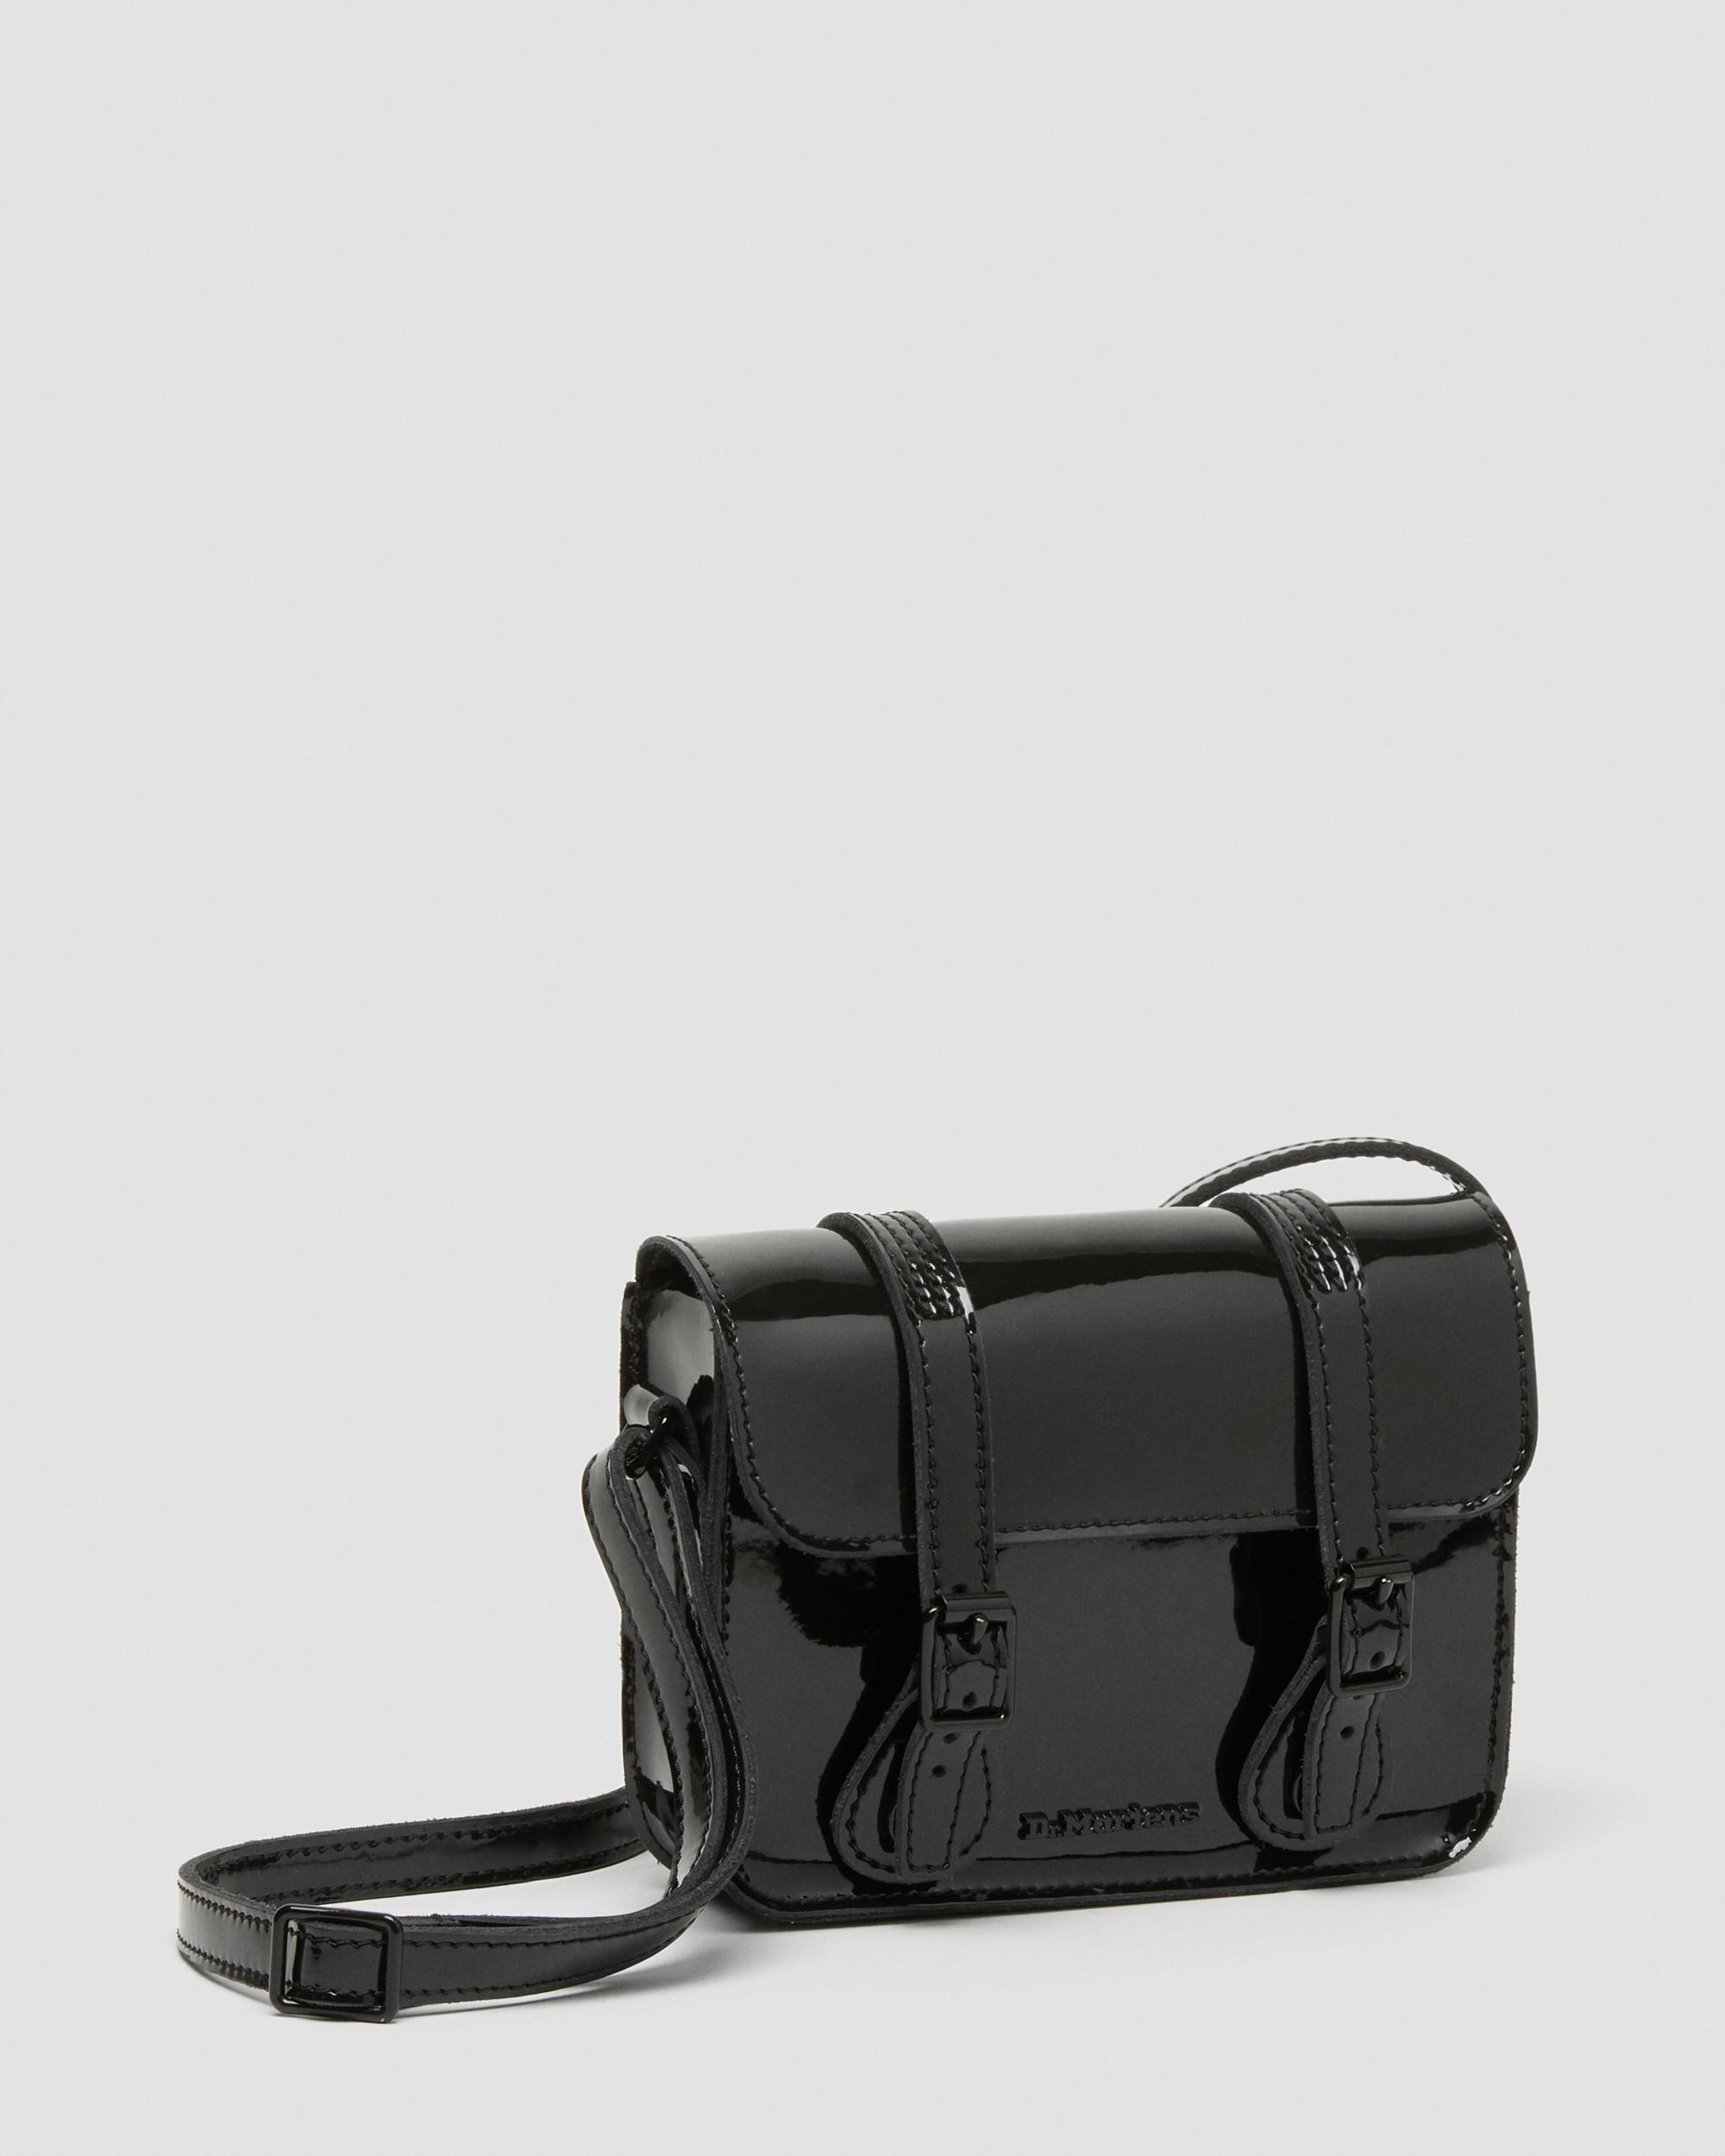 7 inch Patent Leather Crossbody Bag in Black | Dr. Martens